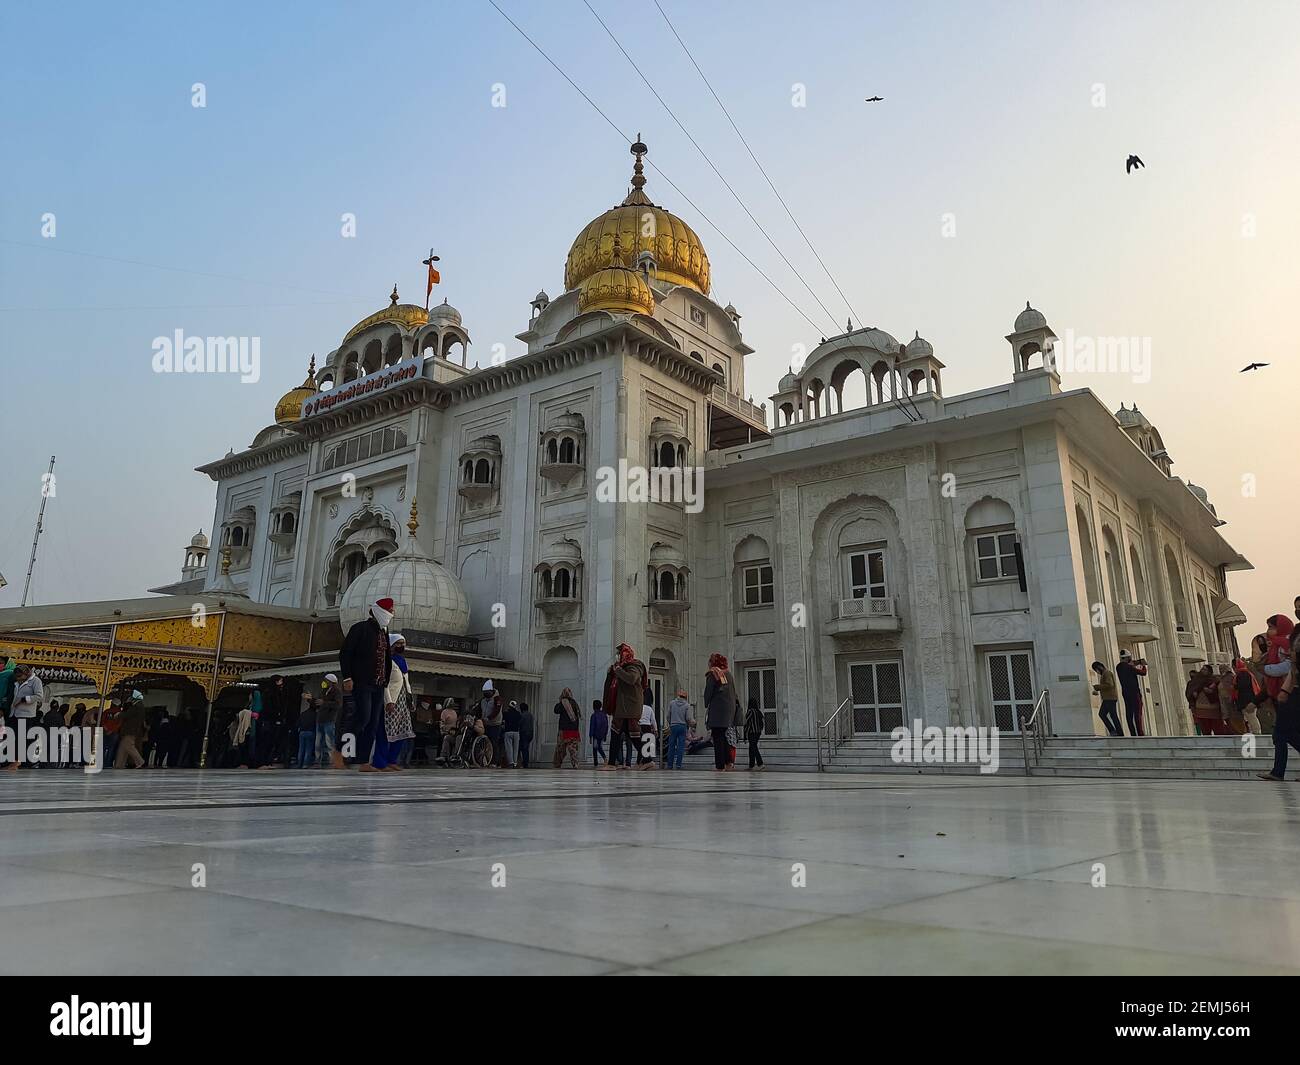 Gurdwara Bangla Sahib is the most prominent Sikh Gurudwara, Bangla Sahib Gurudwara in New Delhi, India inside view during evening time Stock Photo